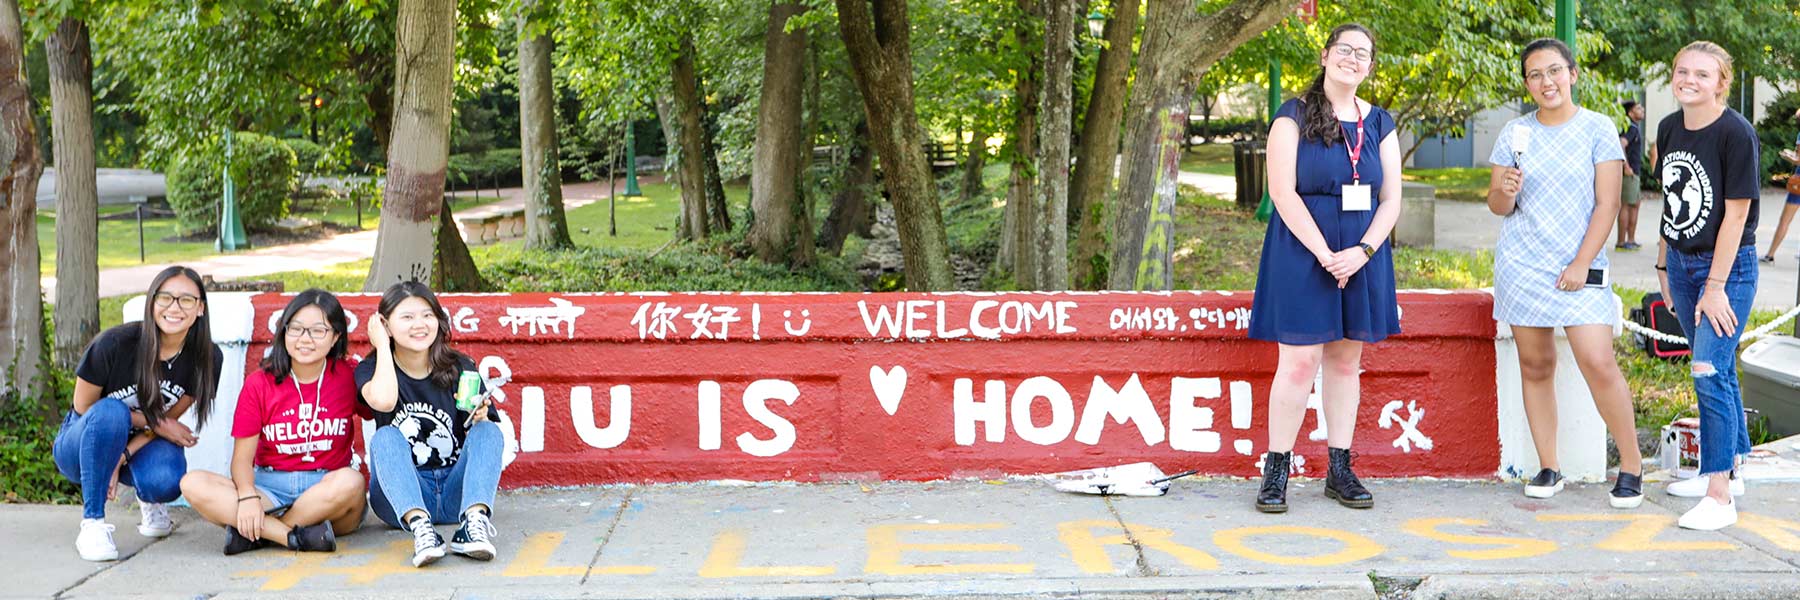 Several students in International Welcome Week tee shirts stand with paint and paintbrushes in front of a bridge wall decorated with white and red words and pictures.